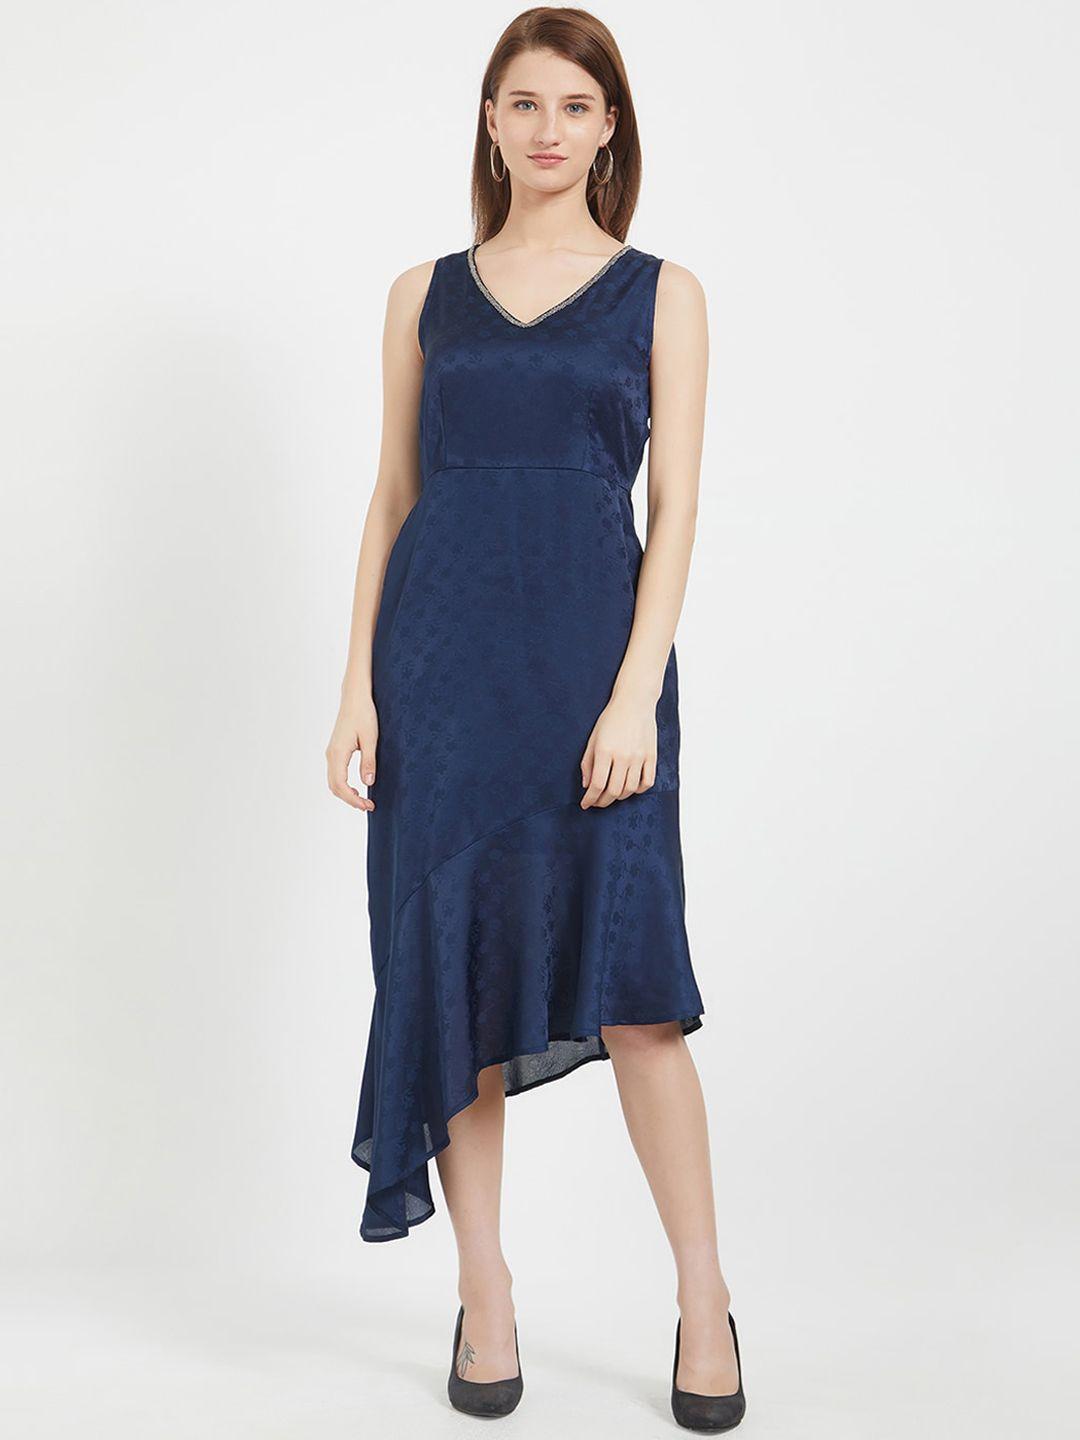 109f-women-navy-blue-self-design-fit-and-flare-dress